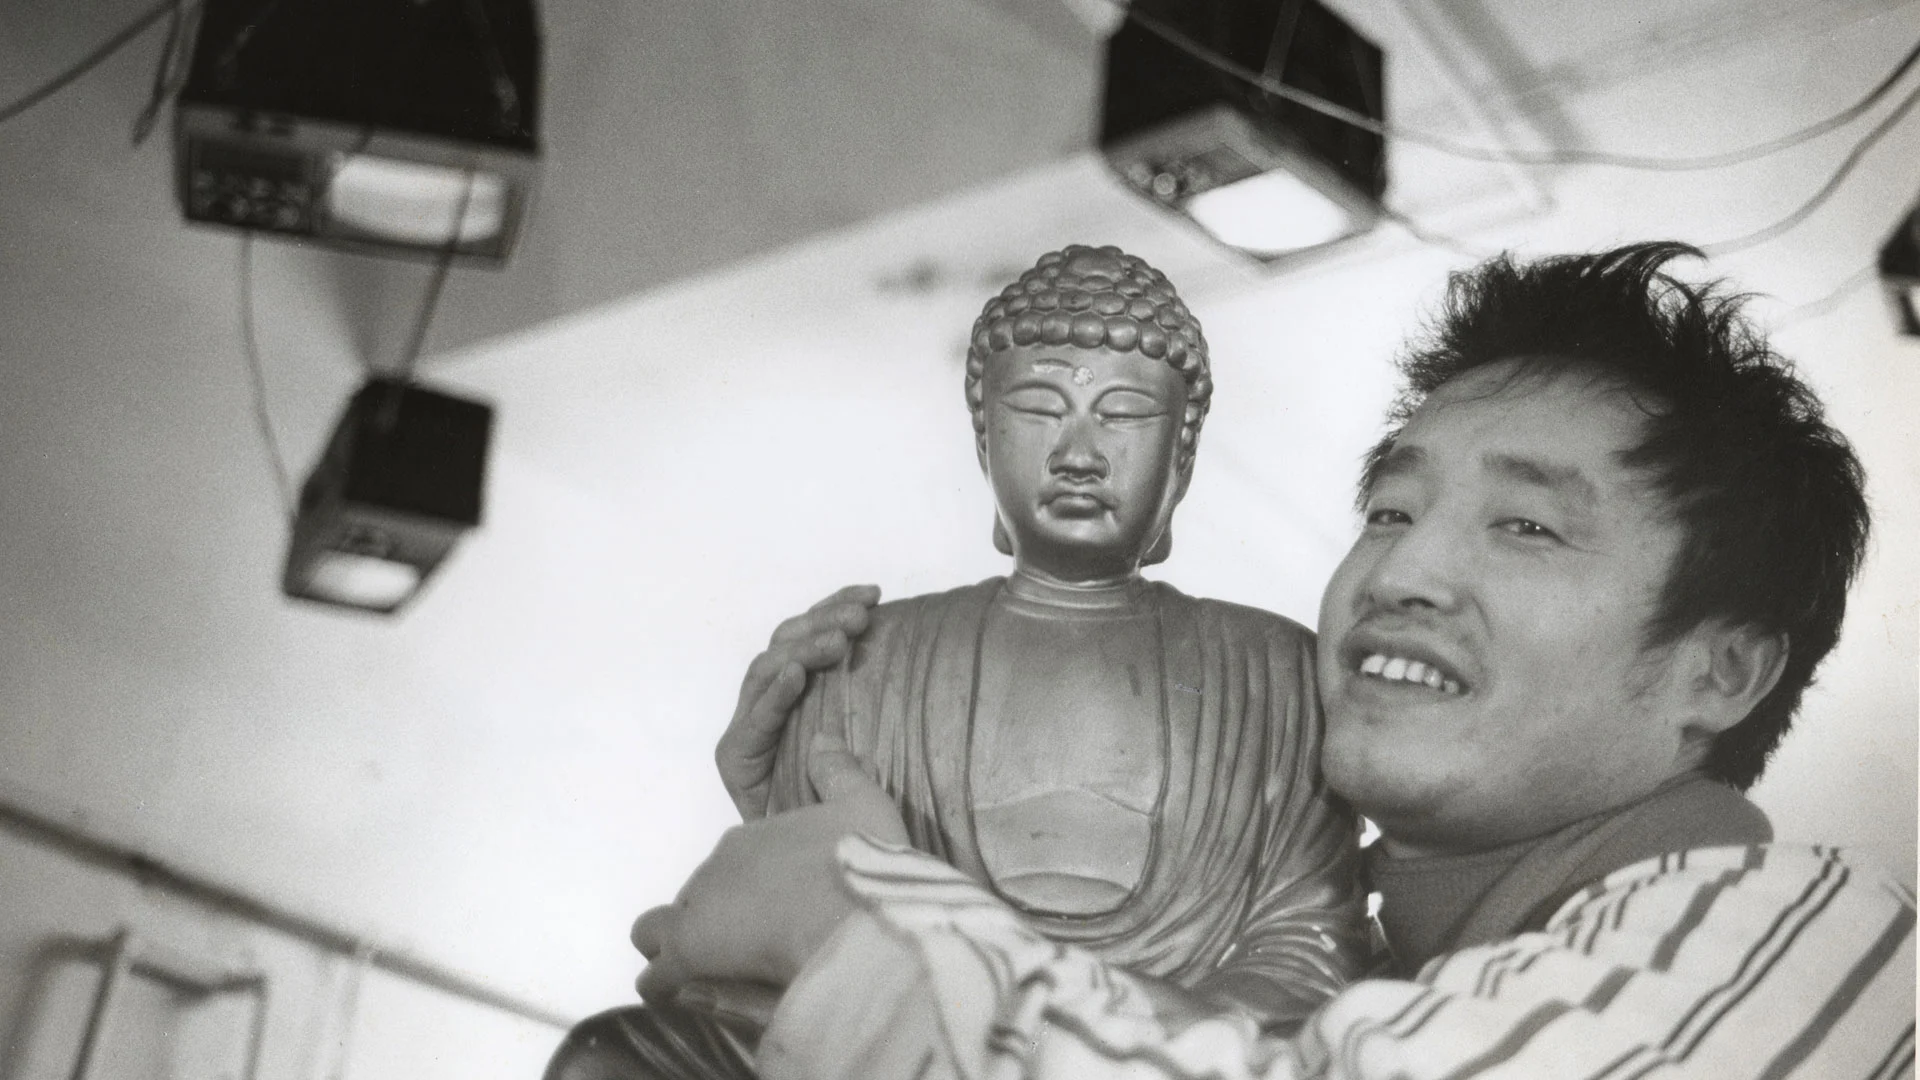 The artist Nam June Paik, an East Asian man with dark hair and wearing a white striped shirt, is pictured in a black and white photograph smiling and holding a large statue of Buddha. Three television sets or monitors are shown suspended from the ceiling behind him with cables running between them.